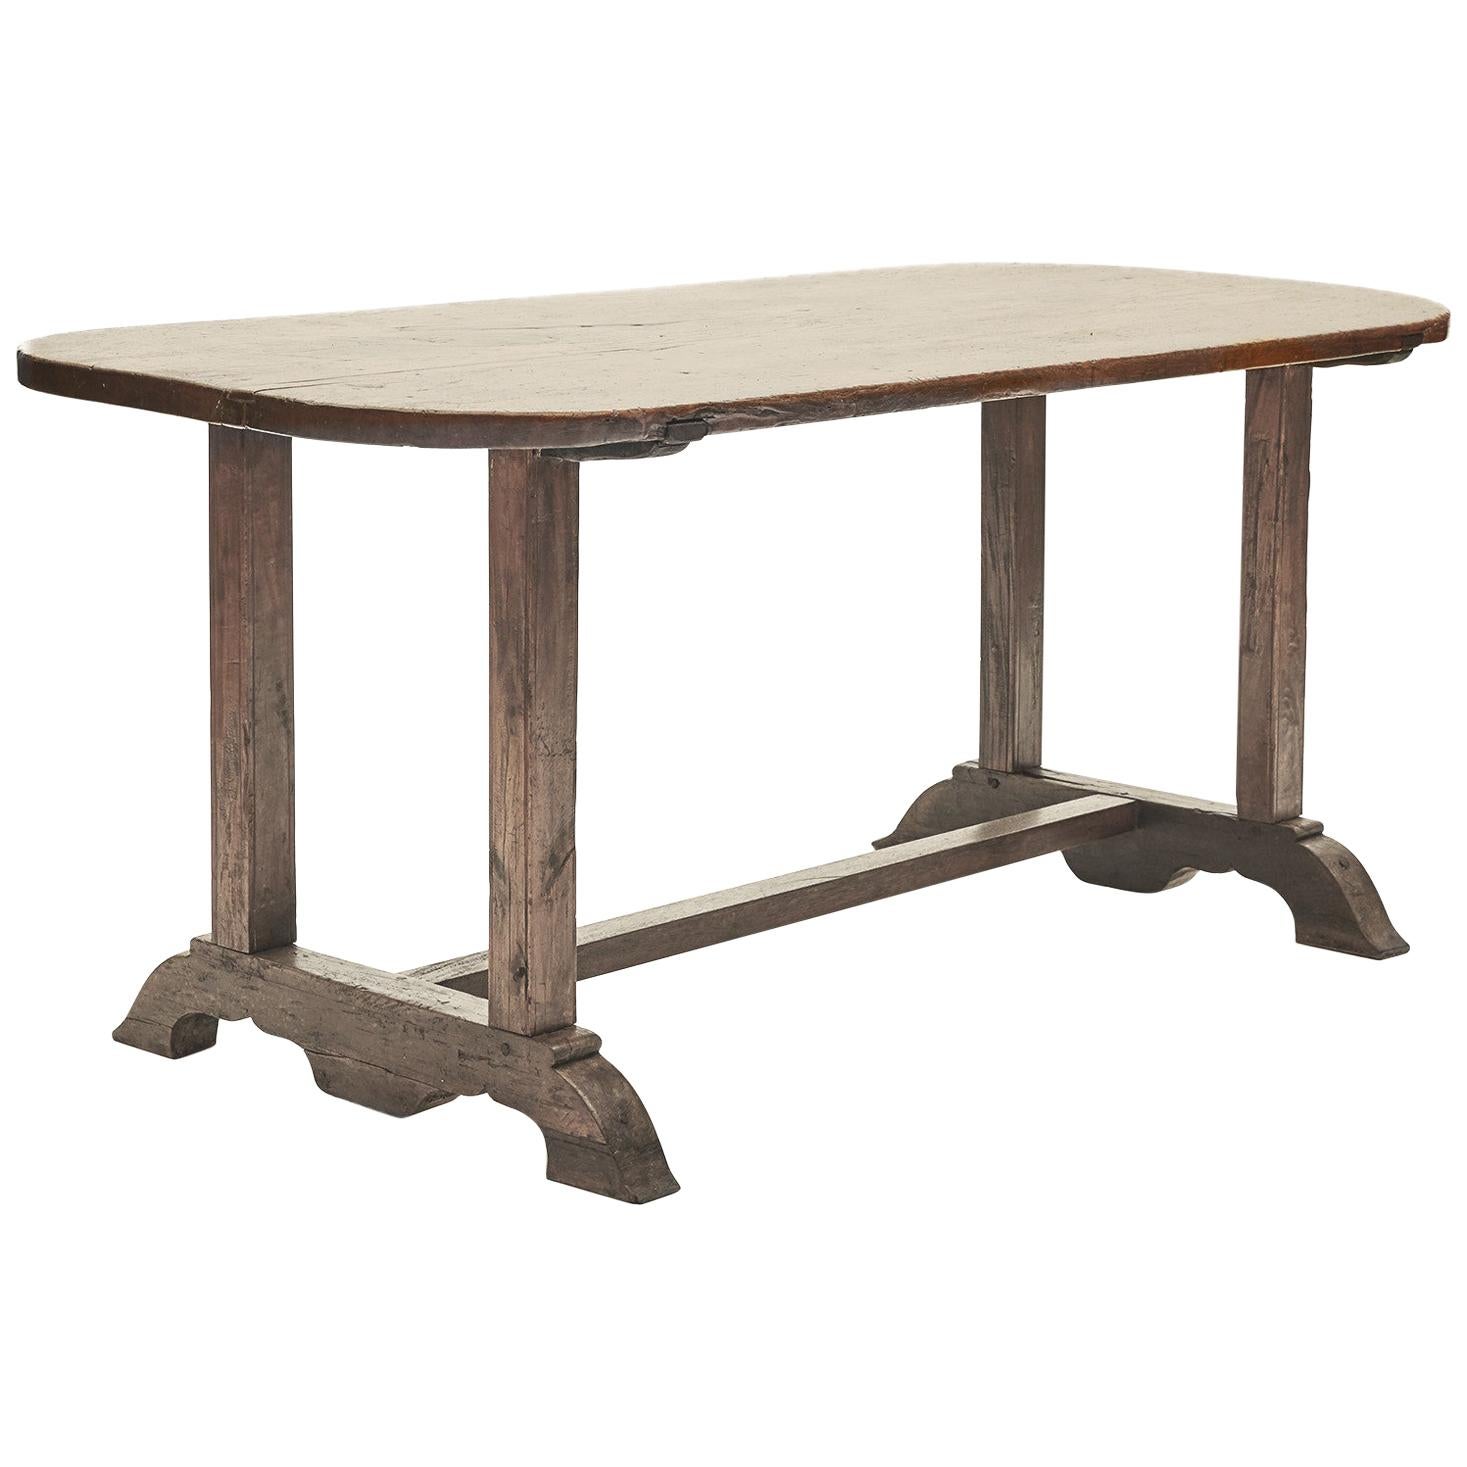 19th Century Philippine Long Dinning Table Made in Solid Molave Wood